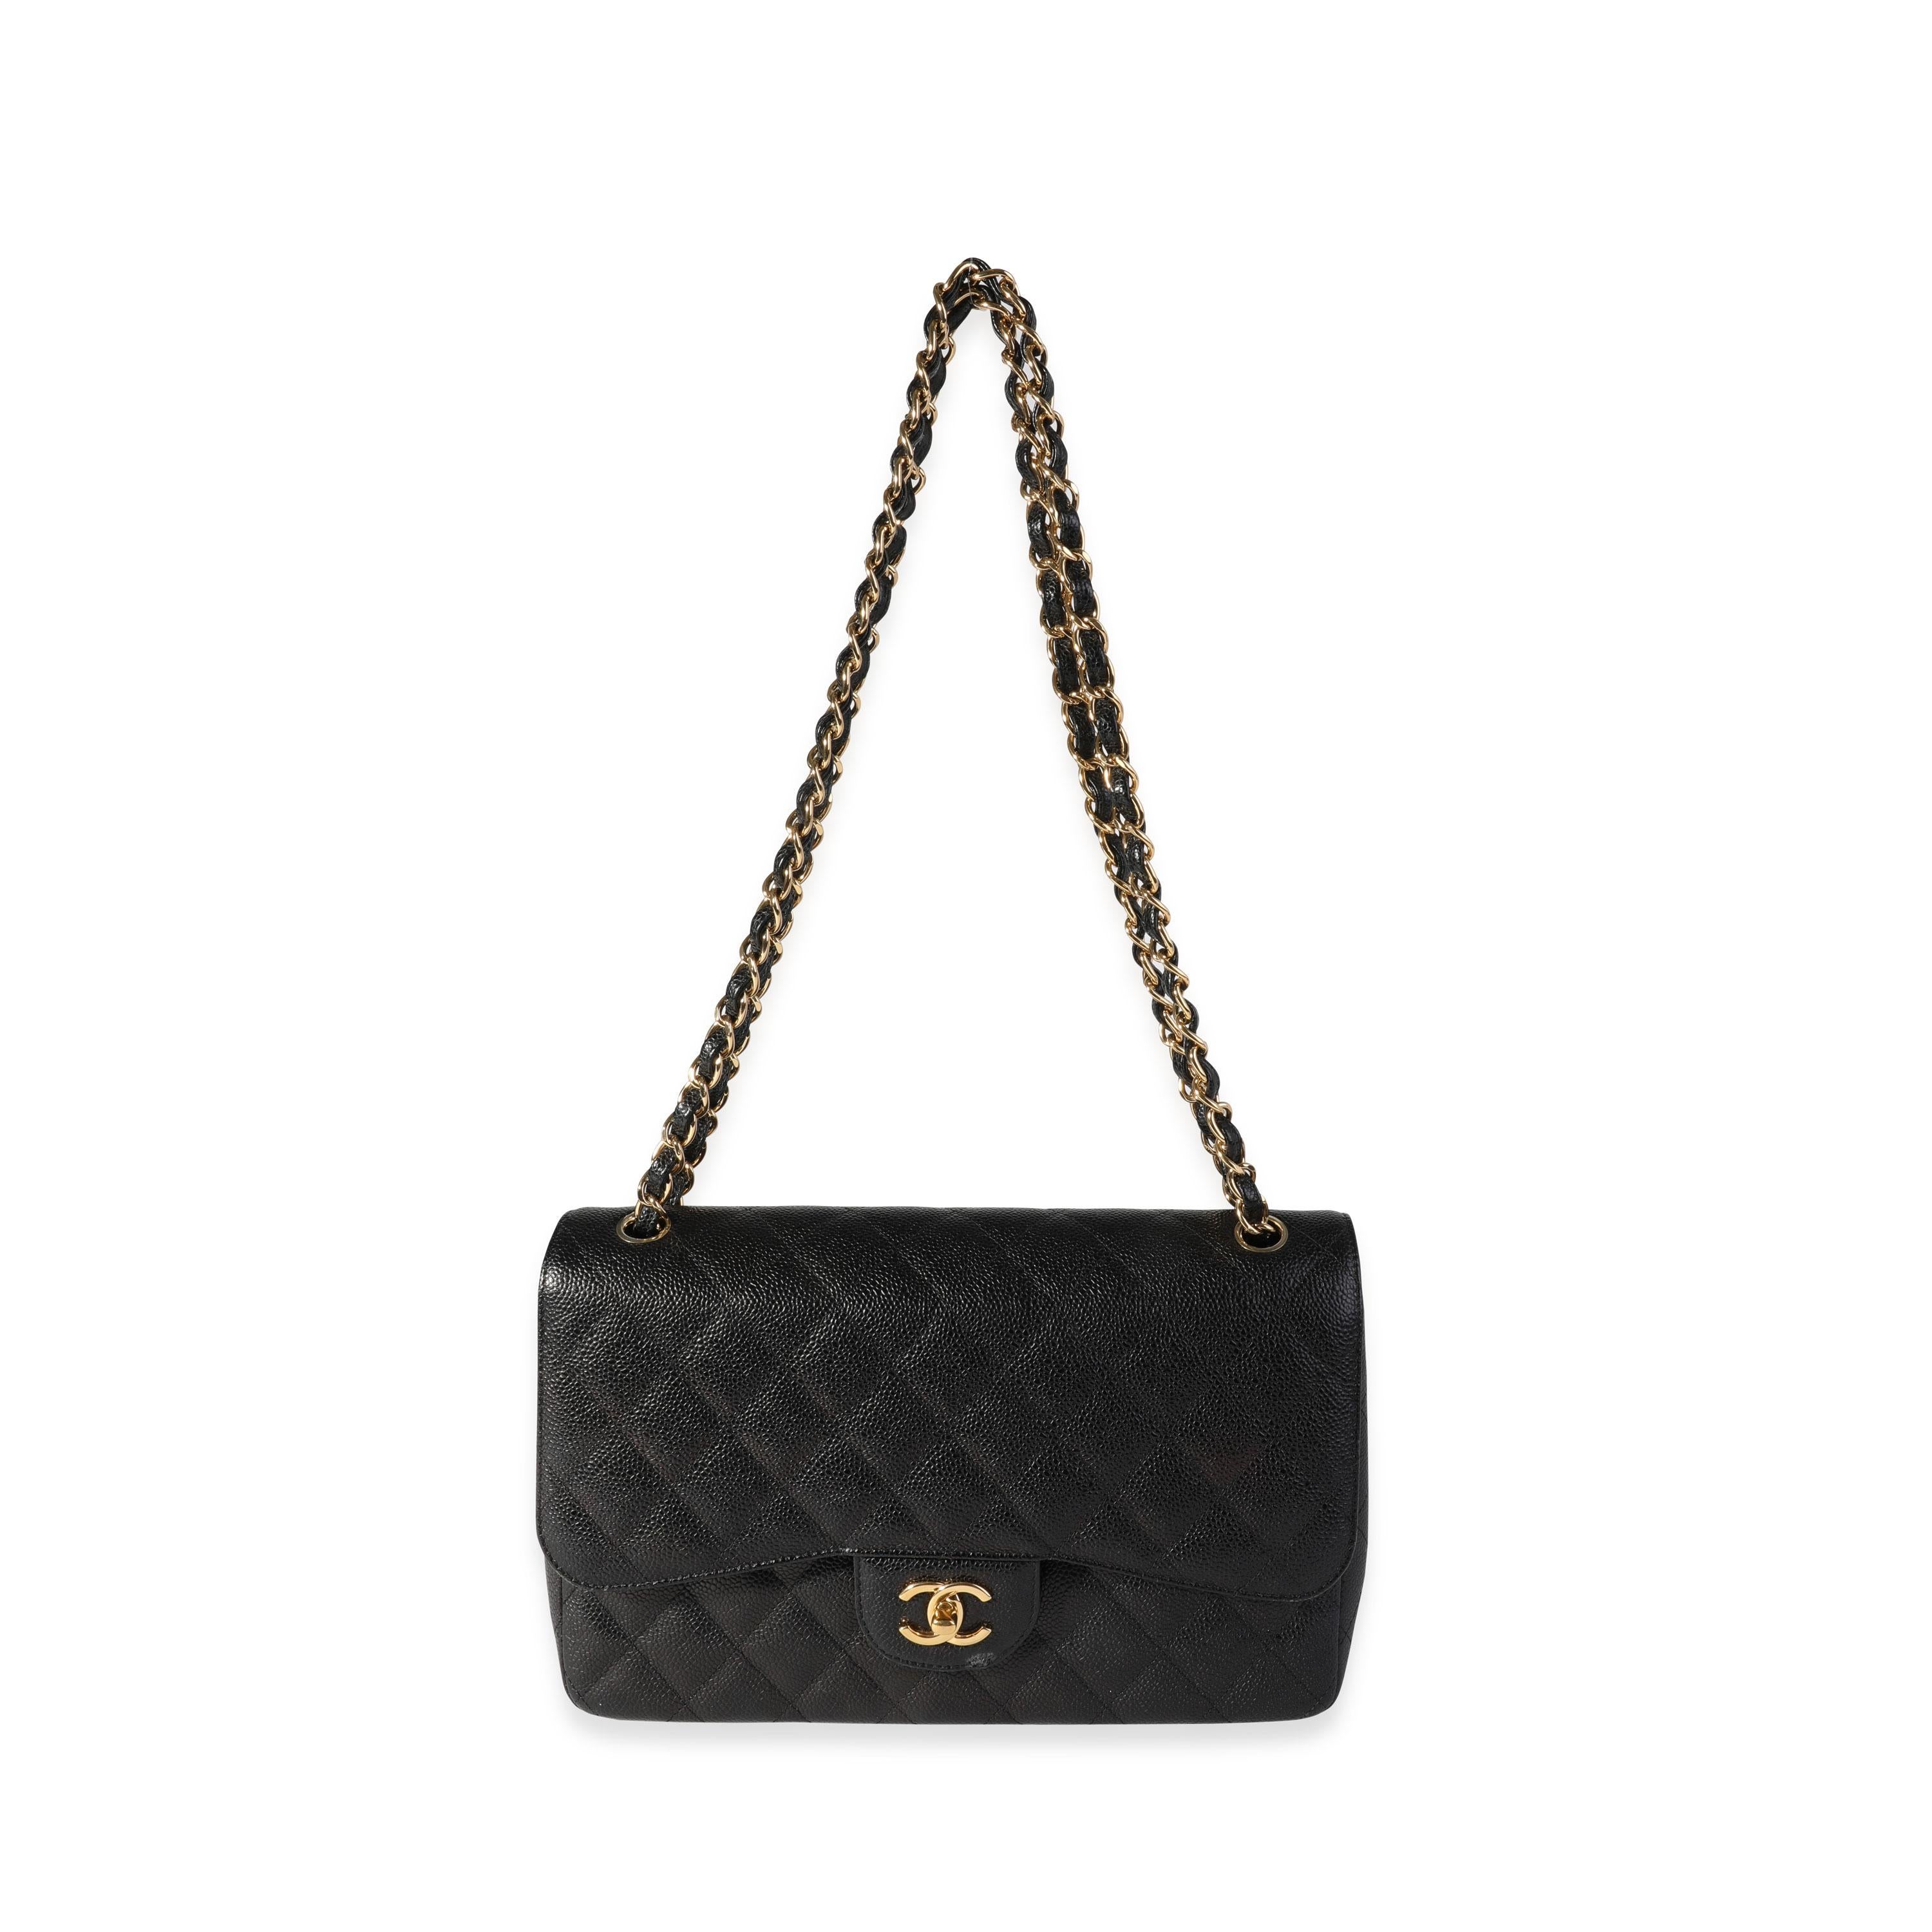 Listing Title: Chanel Black Quilted Caviar Jumbo Classic Double Flap Bag
SKU: 118540
MSRP: 9500.00

Handbag Condition: Very Good
Condition Comments: Very Good Condition. Scuffing to corners and flap. Scratching and tarnishing to hardware. Scuffing